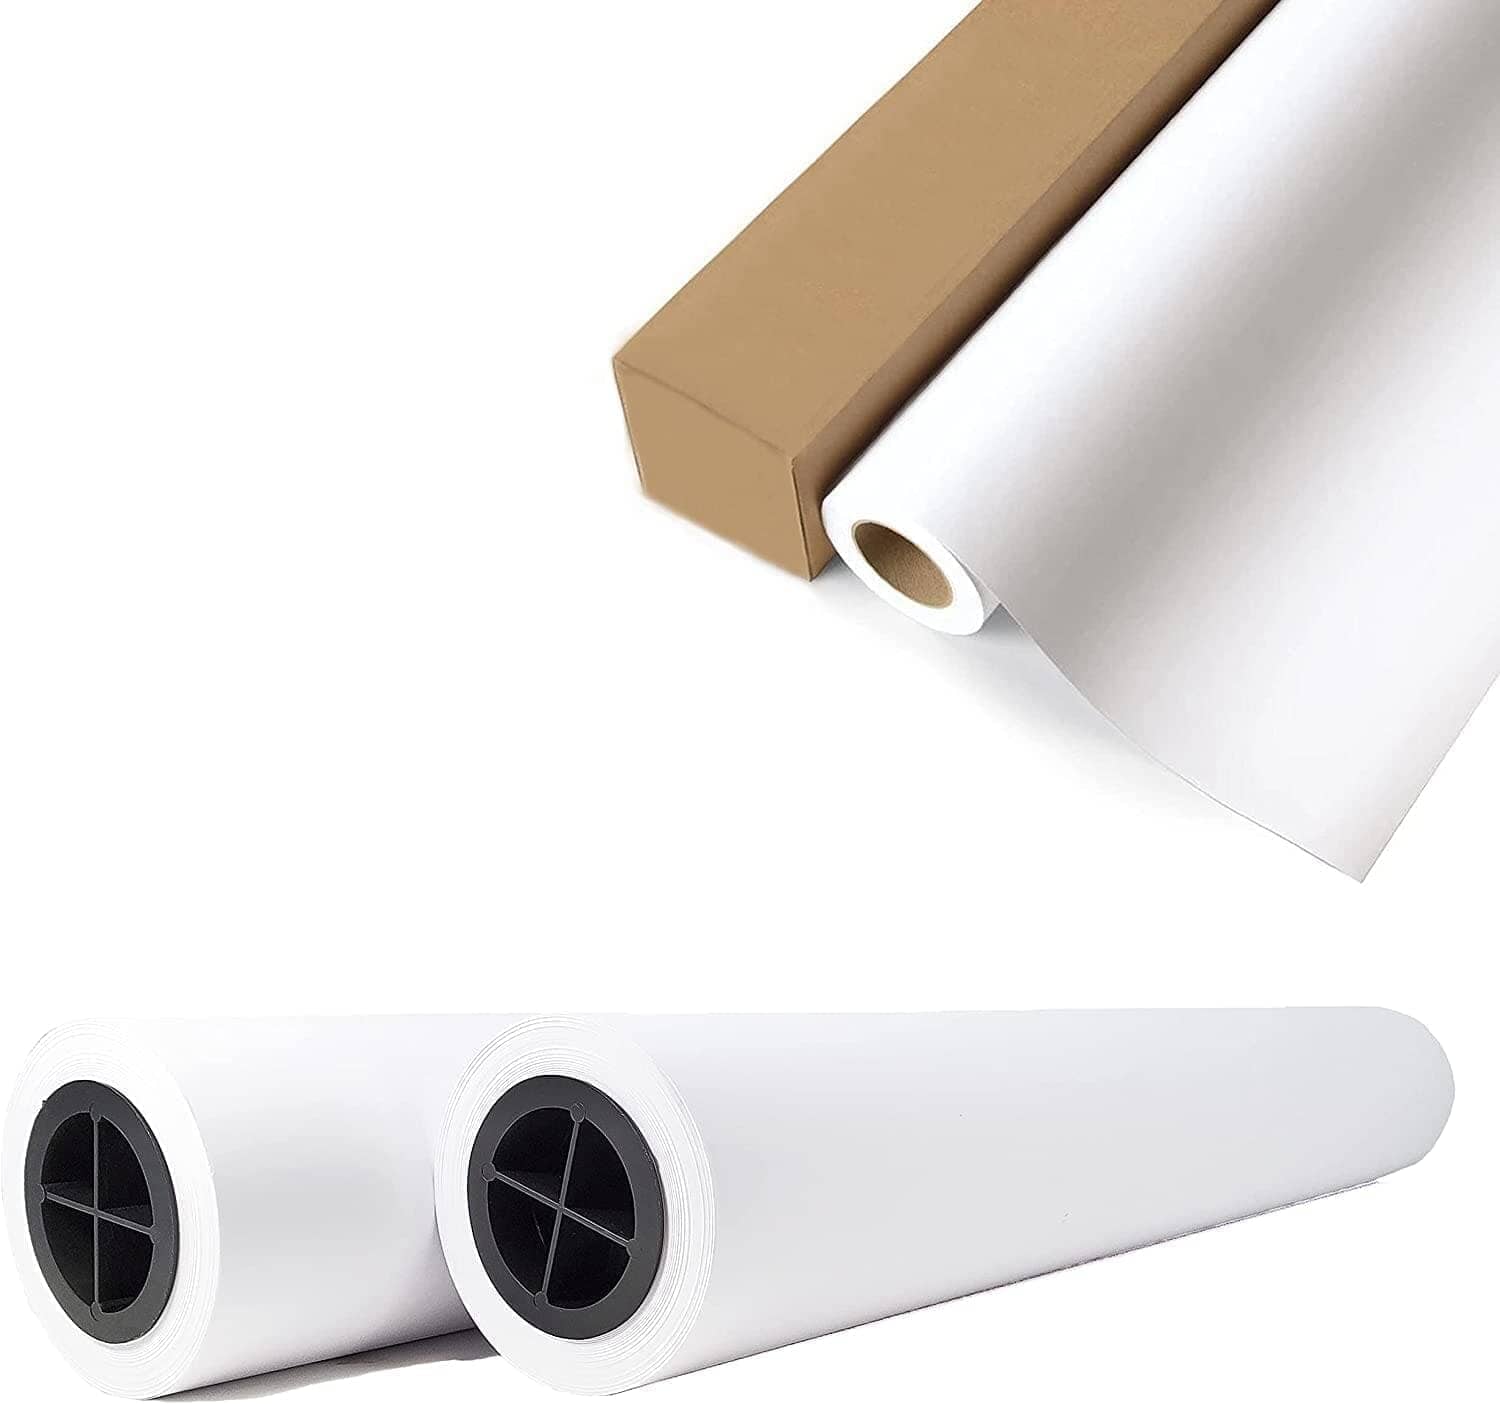 Plotter Paper 36 x 150, CAD Paper Rolls, 20 lb. Bond Paper on 2" Core for CAD Printing on Wide Format Ink Jet Printers, 4 Rolls per Box. Premium Quality - fhs-paperrolls